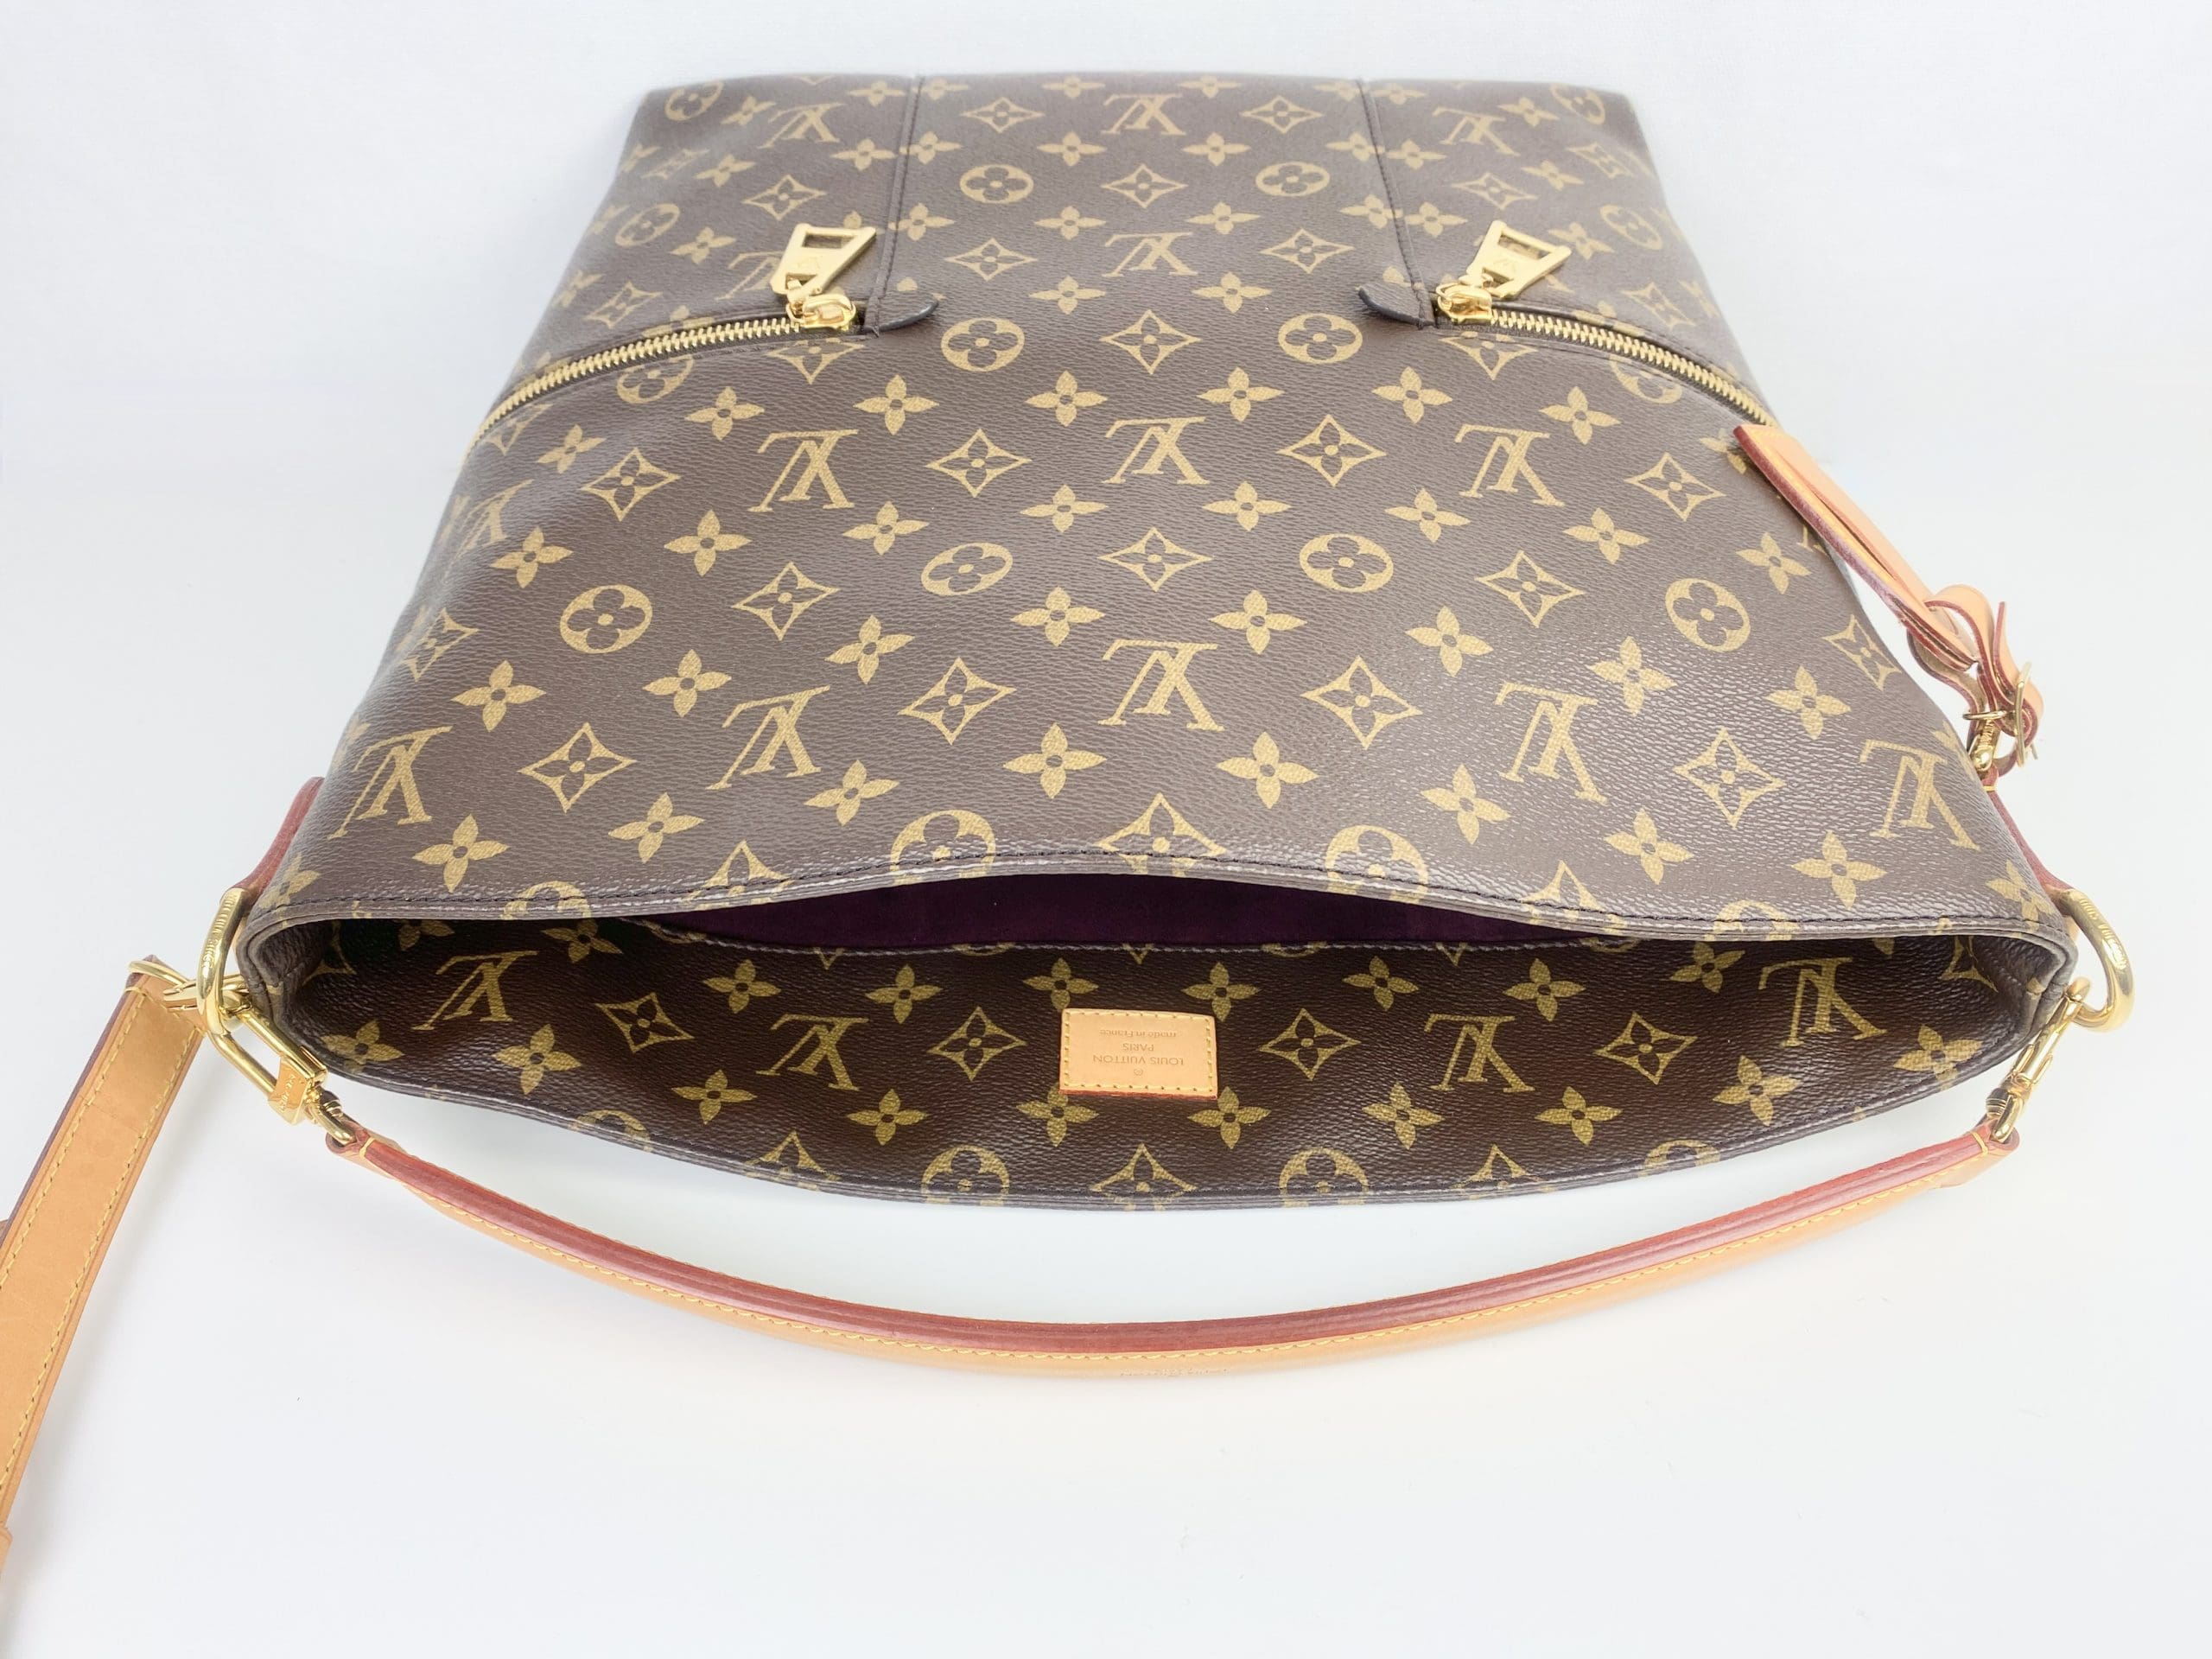 New To Collection, #LouisVuitton #Melie